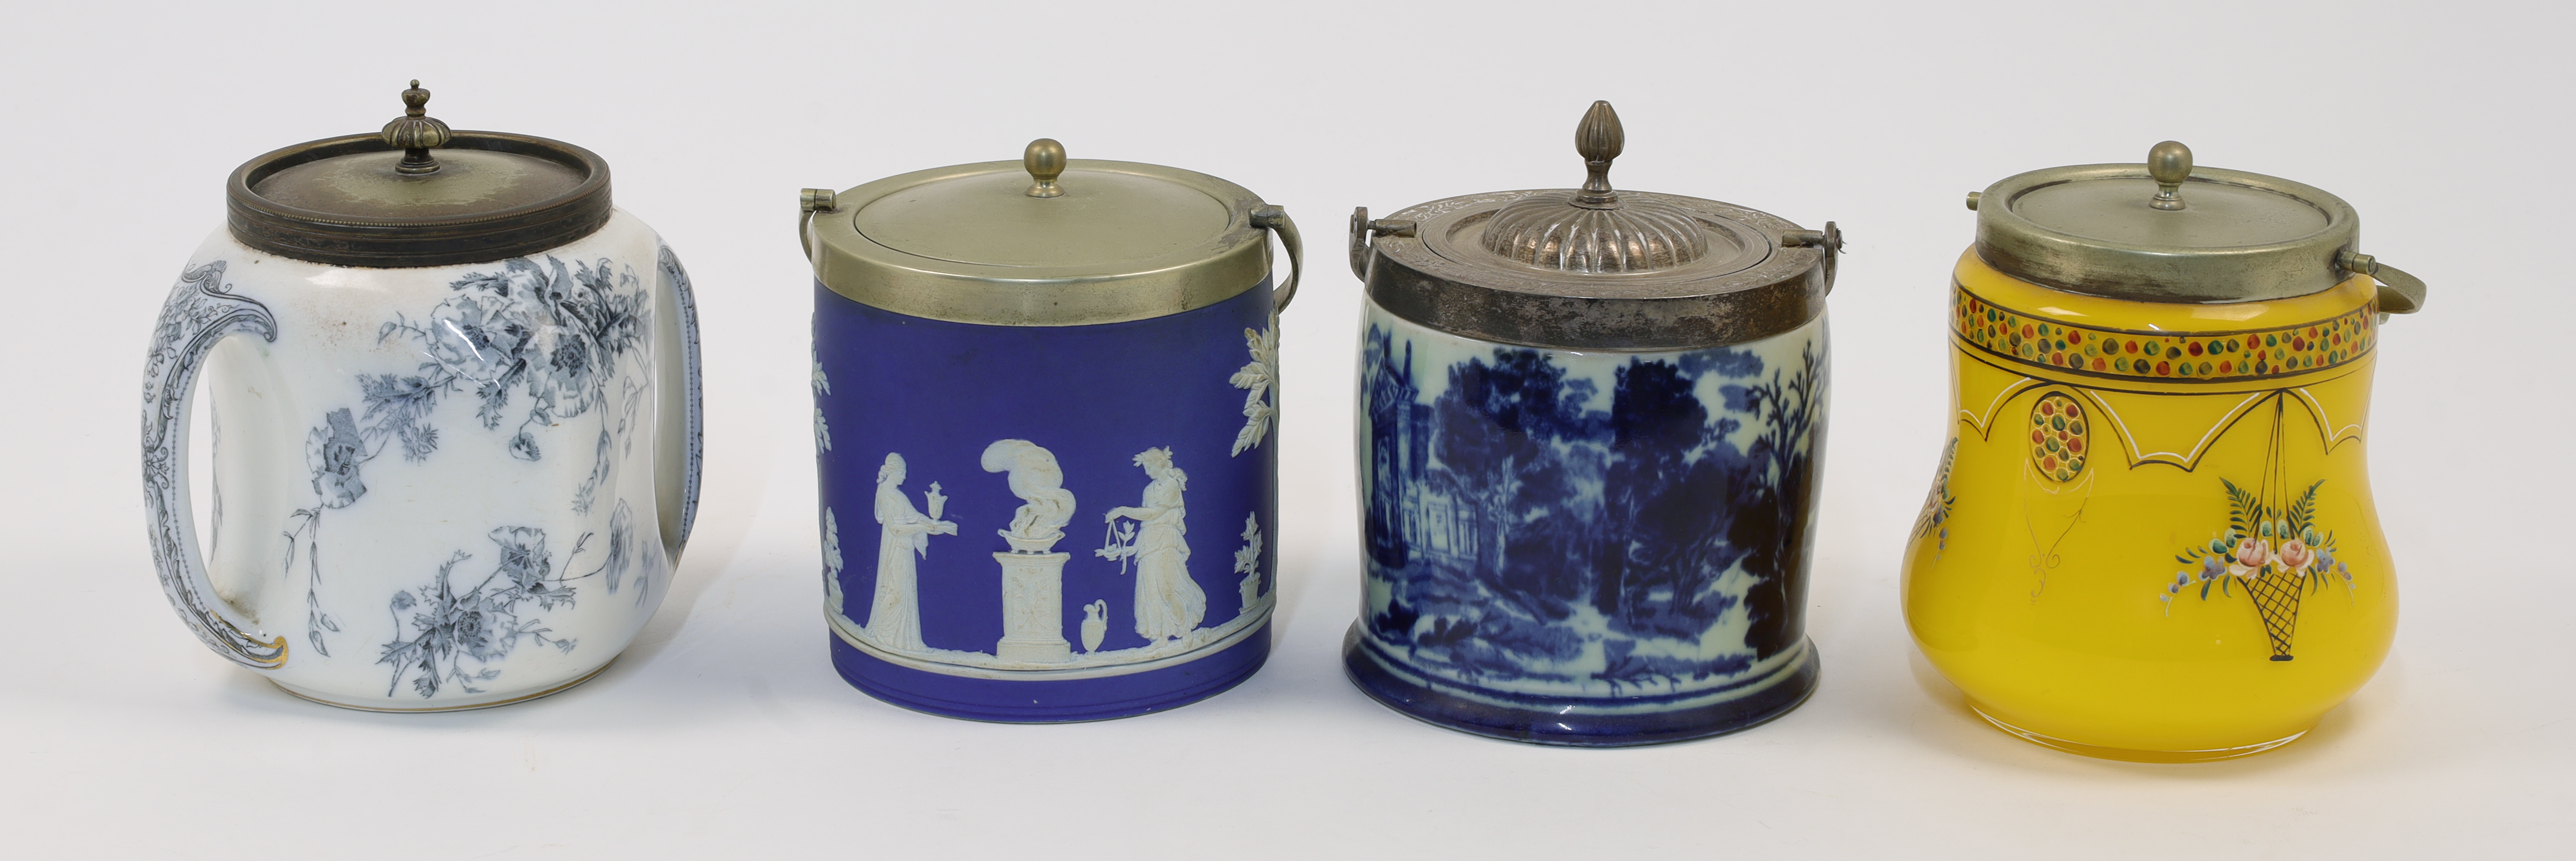 Four biscuit barrels, 19th - 20th centuries, to include a Wedgwood blue jasperware example of cyl...